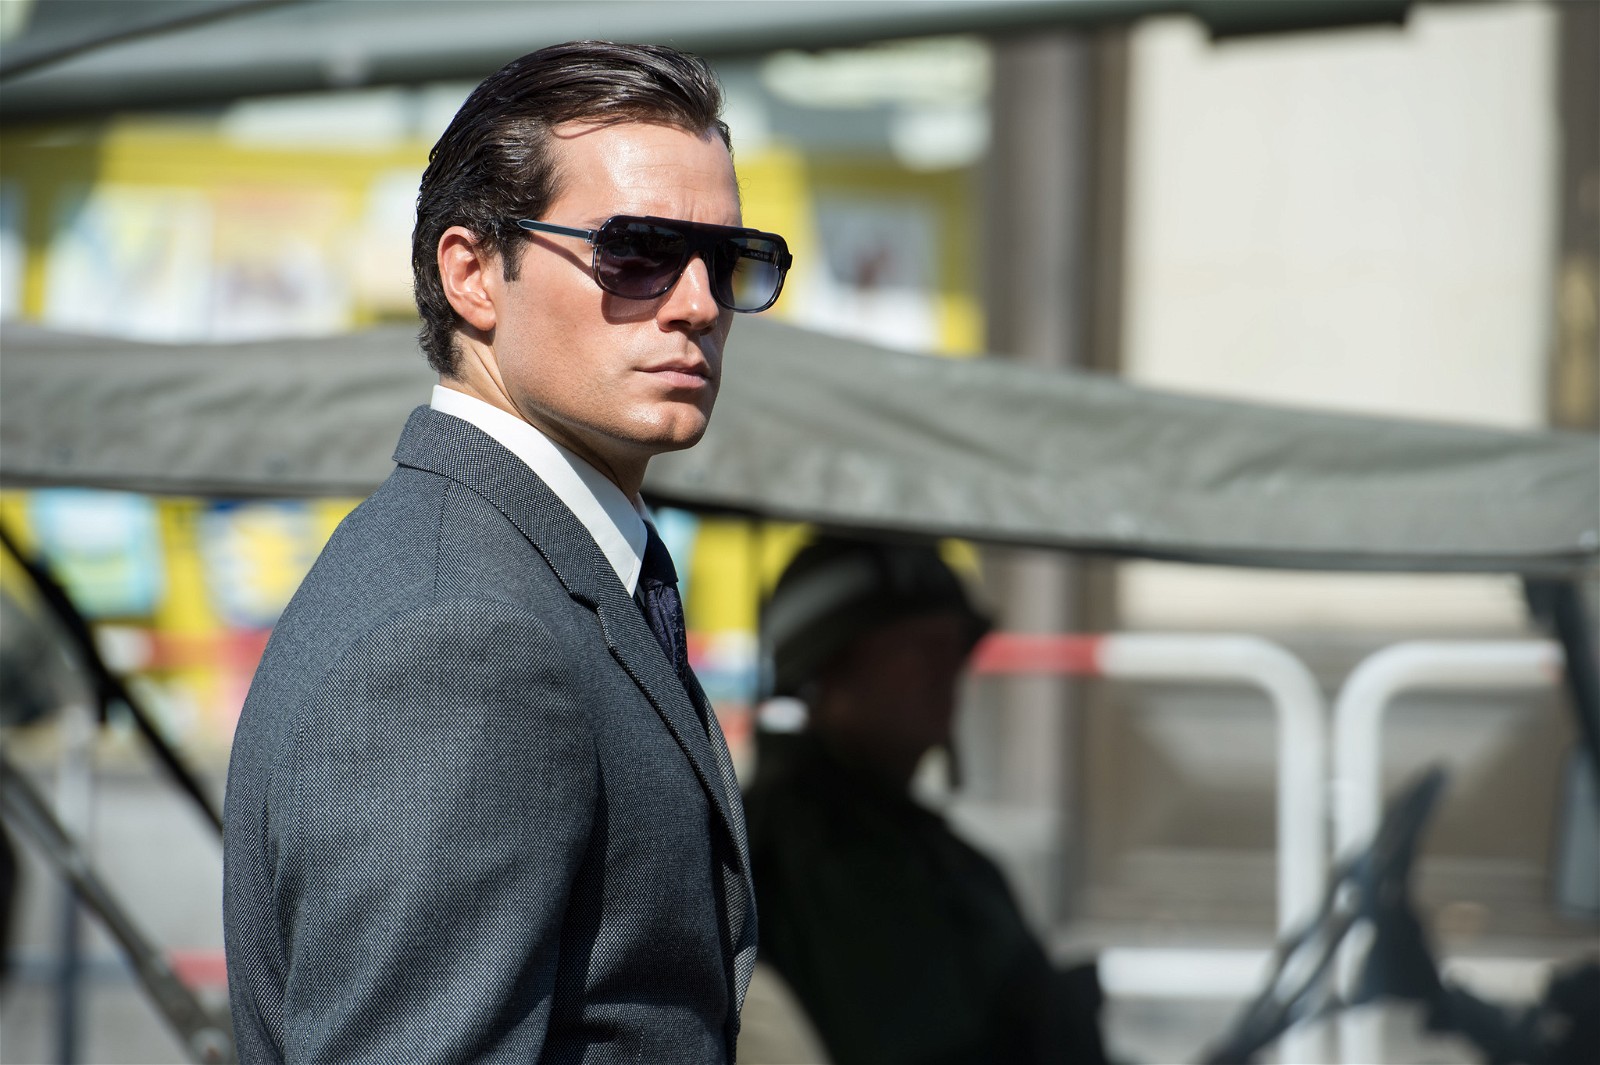 Henry Cavill is the most desirable star to play James Bond